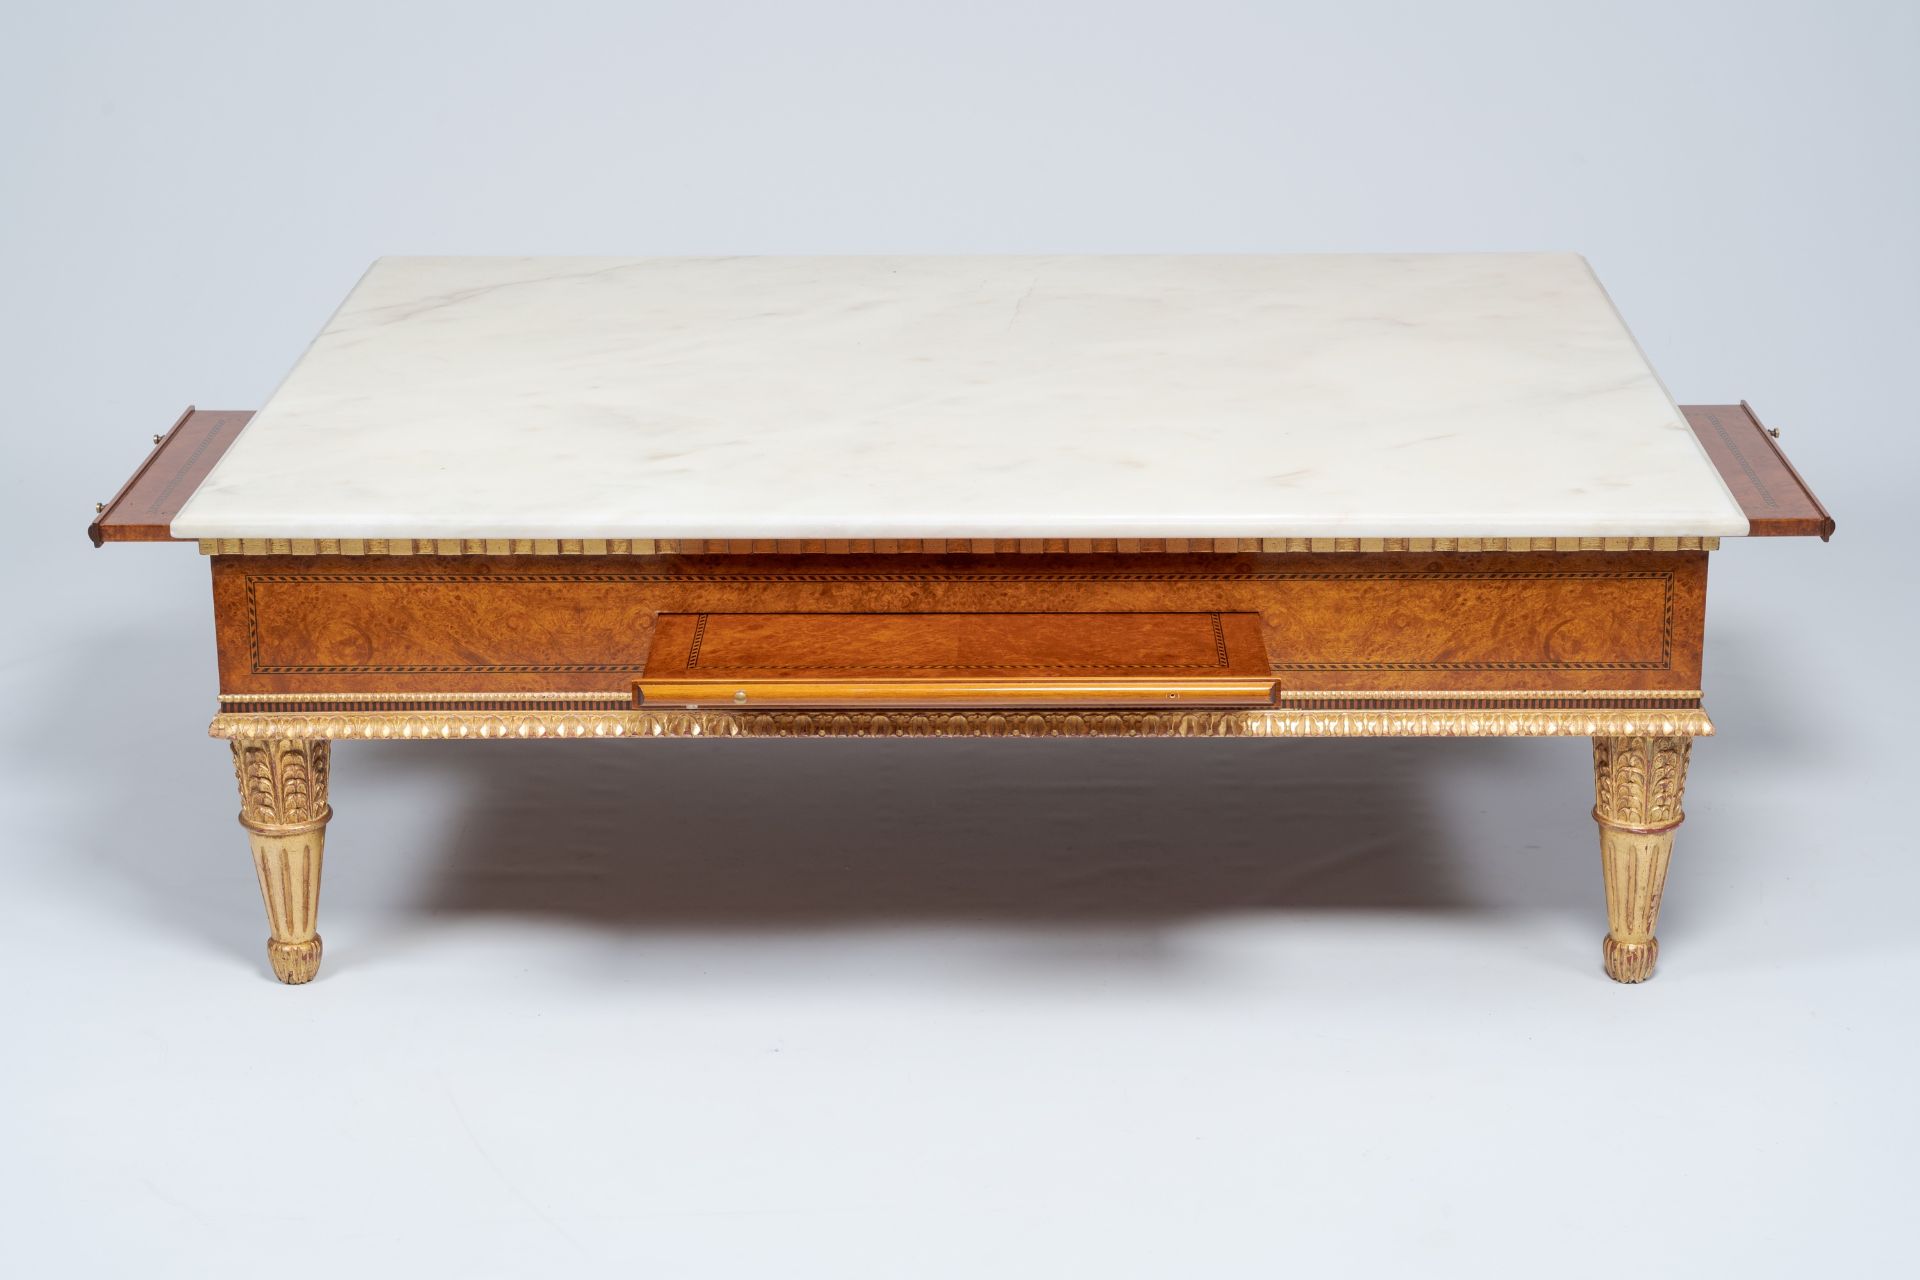 A Neoclassical partly gilt wood coffee table with marble top and four extendable plateaus, 20th C. - Image 4 of 8